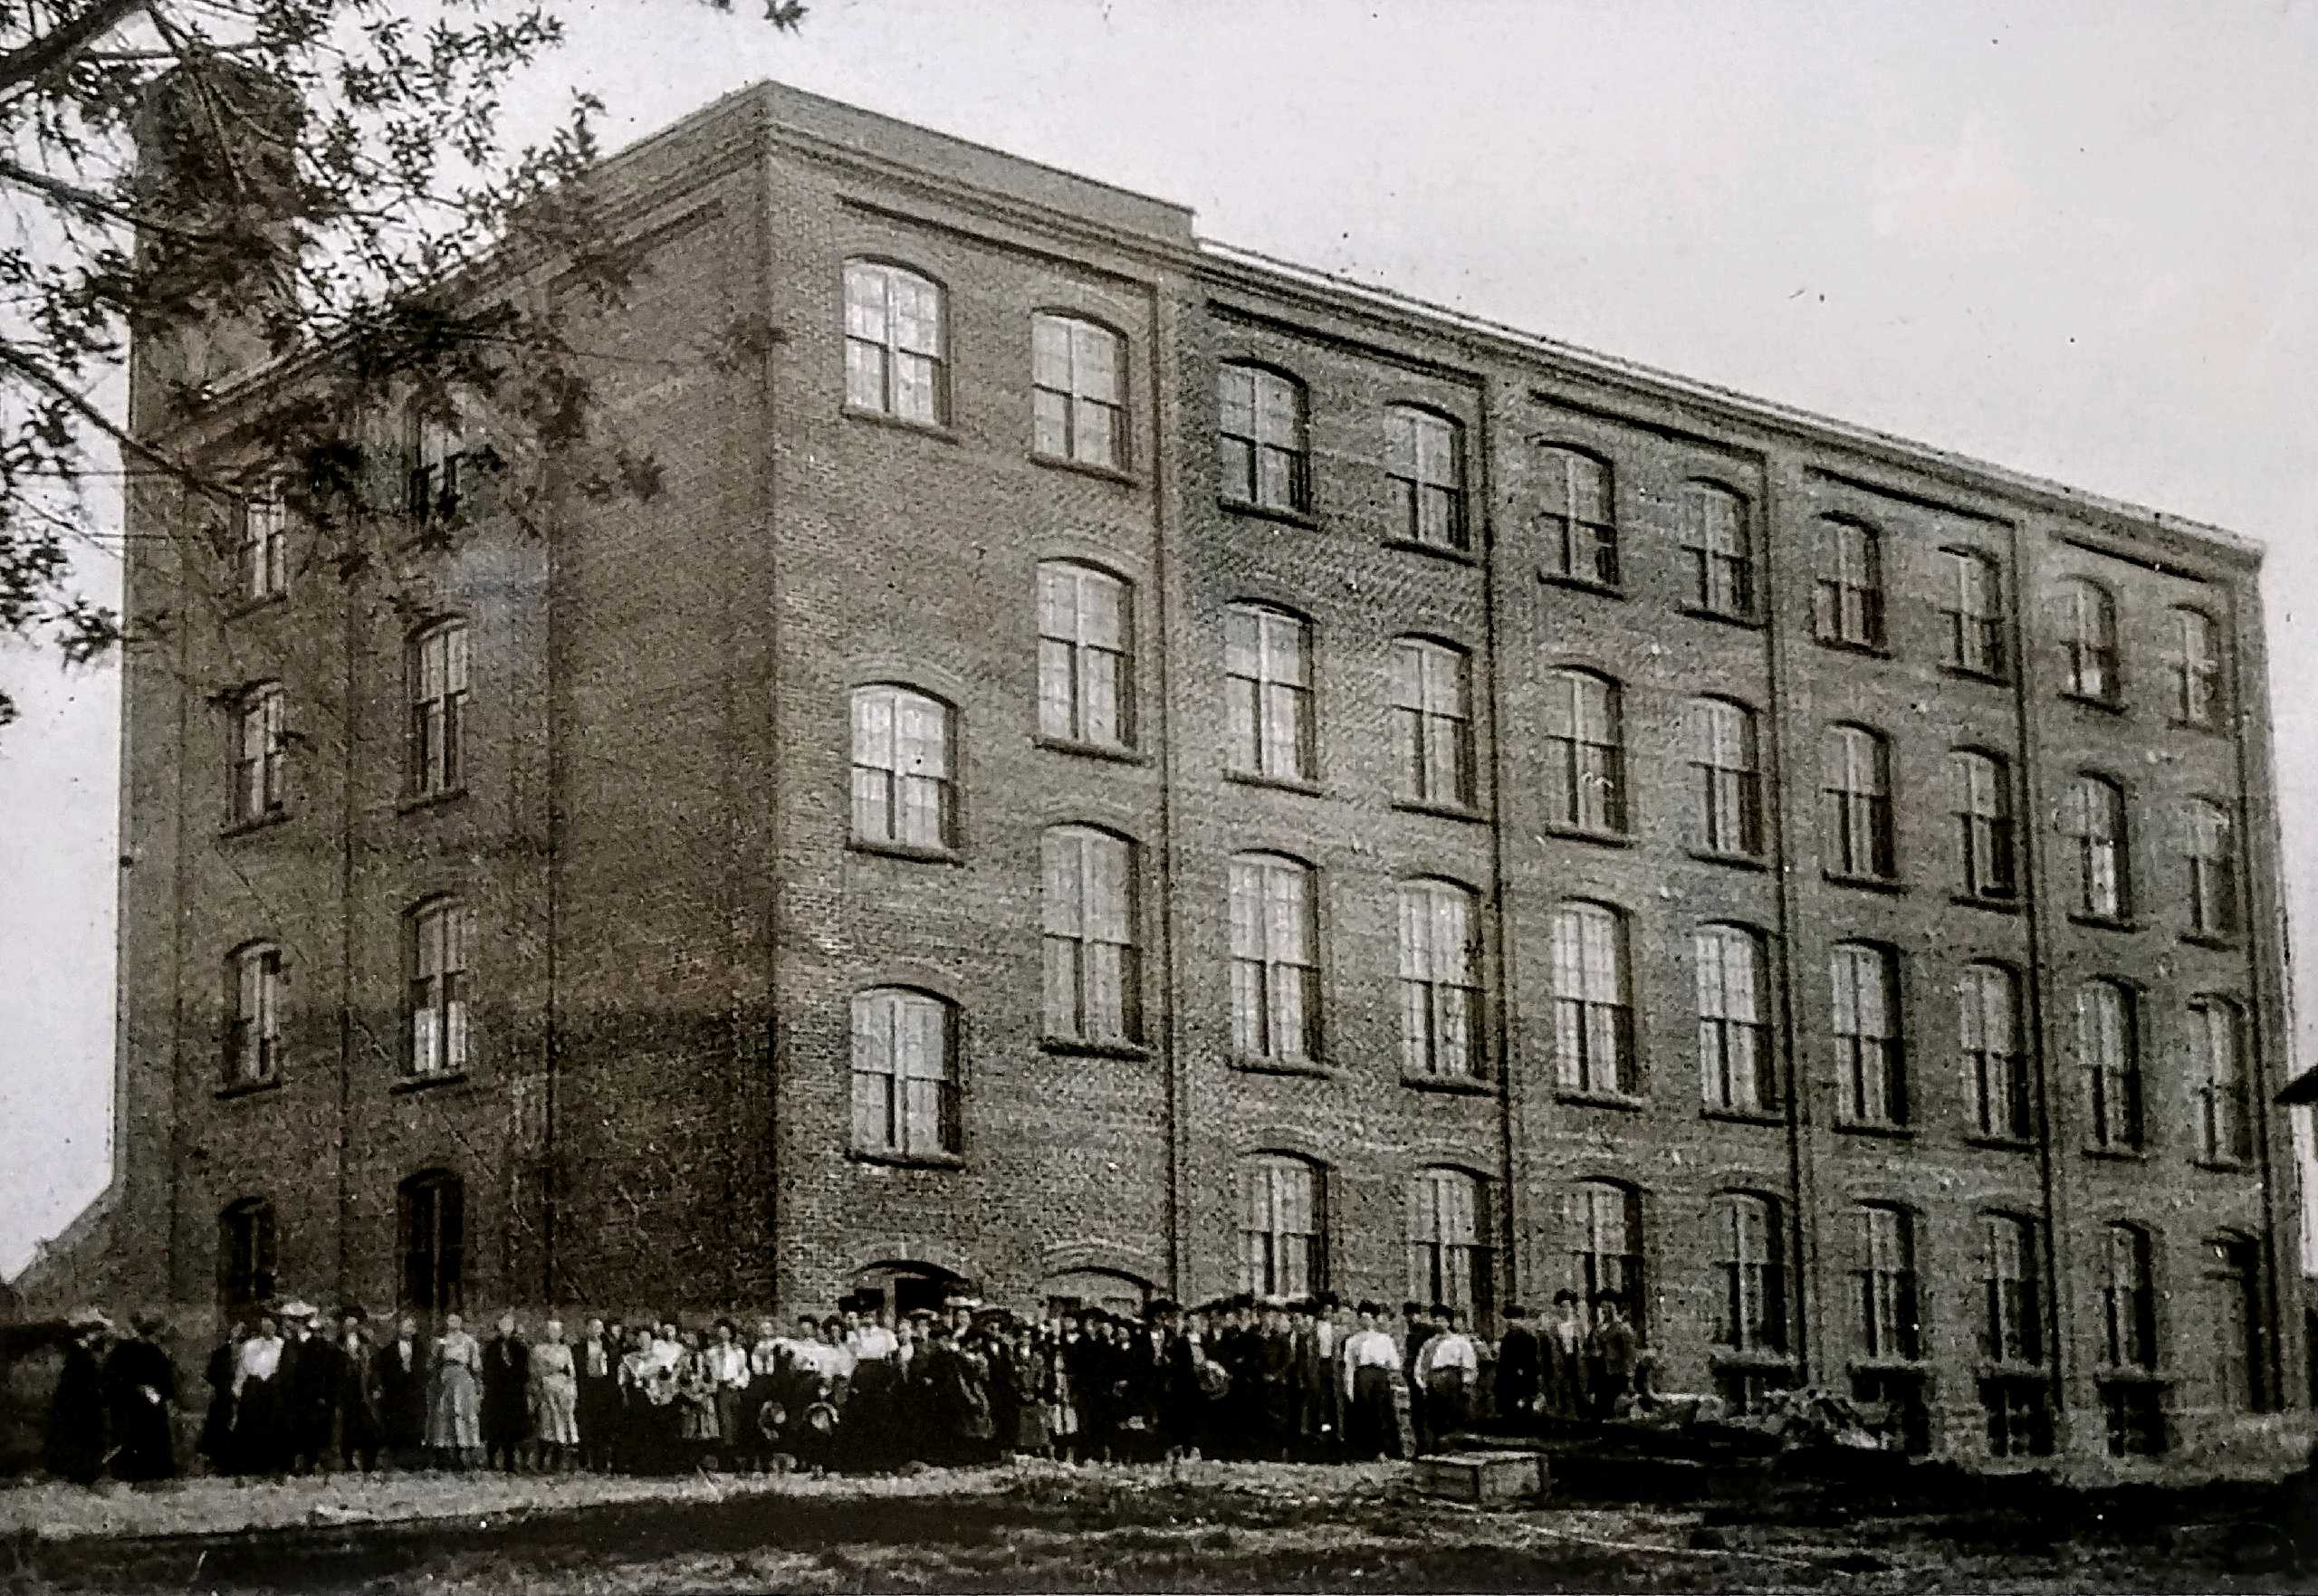 Black and white photograph of a factory building with a group of people in front.